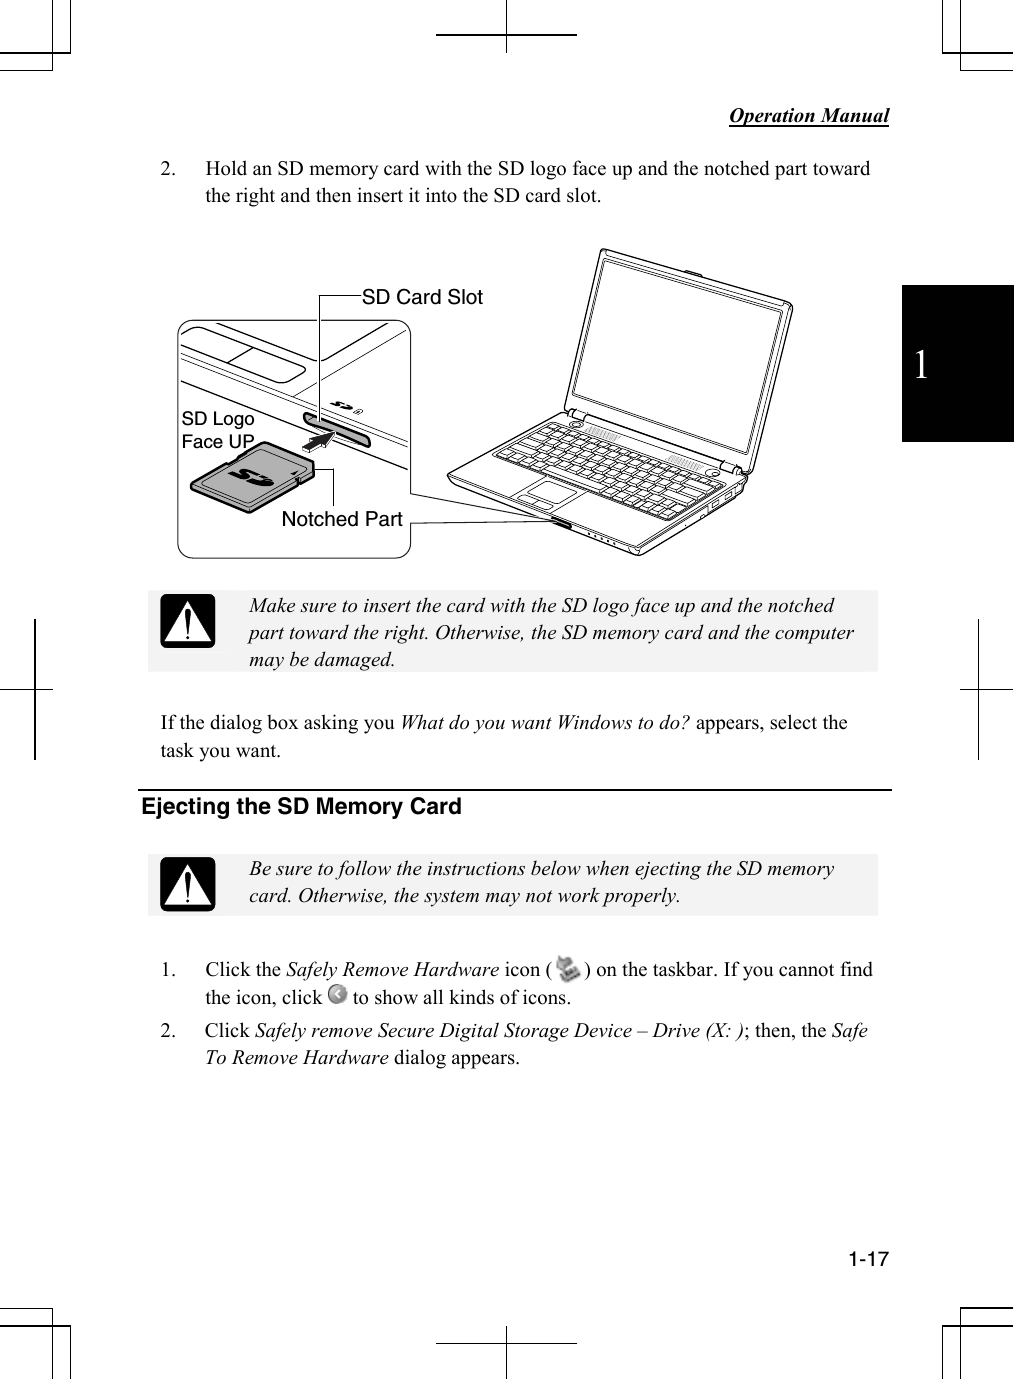           Operation Manual  1-17  1 2. Hold an SD memory card with the SD logo face up and the notched part toward the right and then insert it into the SD card slot.      Make sure to insert the card with the SD logo face up and the notched part toward the right. Otherwise, the SD memory card and the computer may be damaged.  If the dialog box asking you What do you want Windows to do? appears, select the task you want.  Ejecting the SD Memory Card   Be sure to follow the instructions below when ejecting the SD memory card. Otherwise, the system may not work properly.  1. Click the Safely Remove Hardware icon (      ) on the taskbar. If you cannot find the icon, click   to show all kinds of icons. 2. Click Safely remove Secure Digital Storage Device – Drive (X: ); then, the Safe To Remove Hardware dialog appears.      Notched Part SD Card Slot SD LogoFace UP 